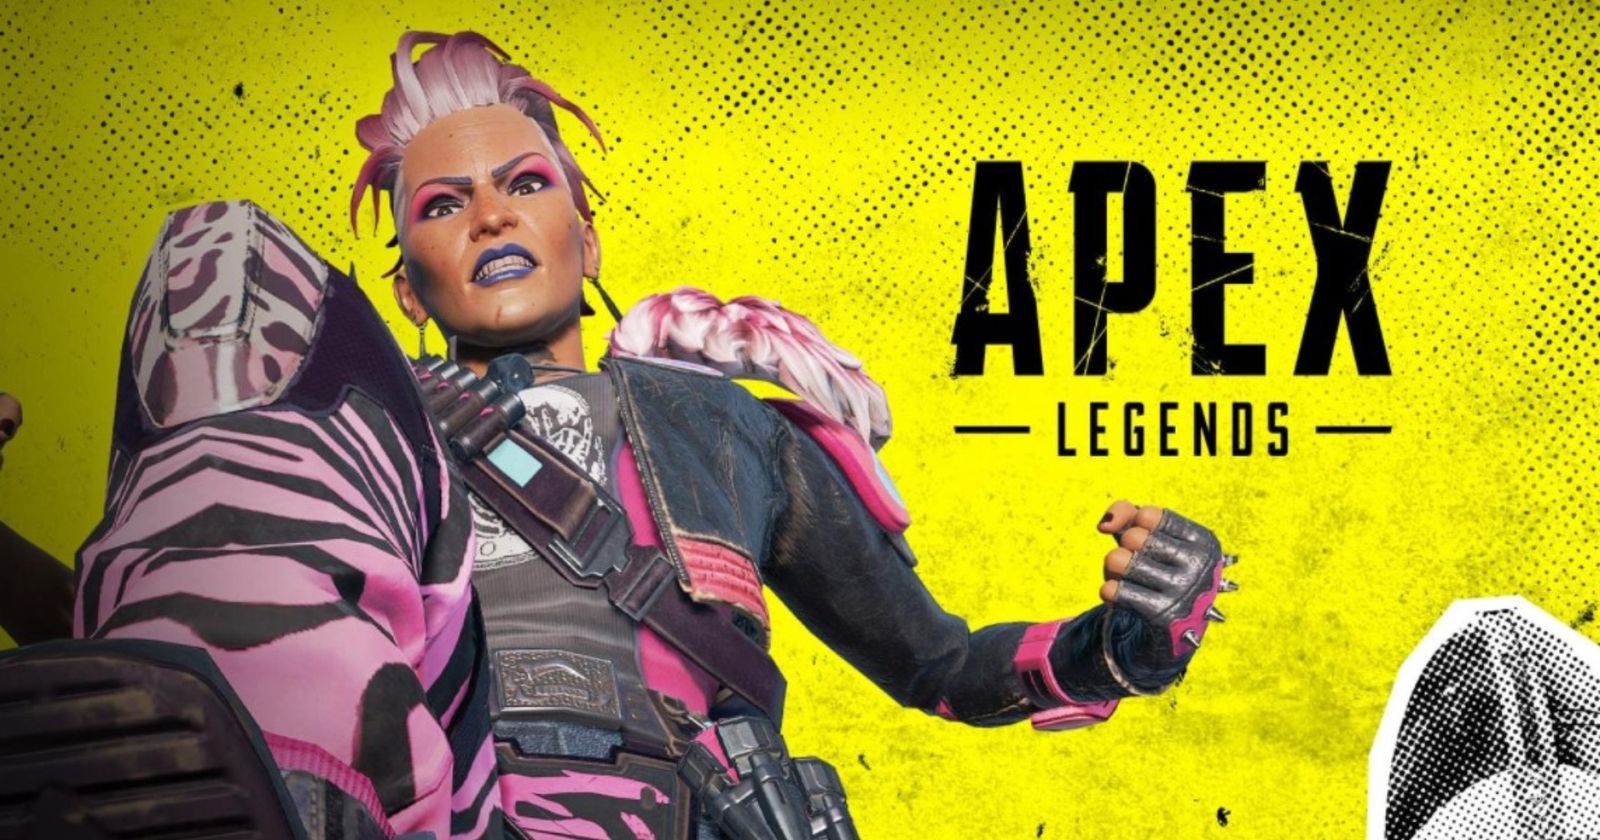 Apex Legends Twitch Prime Pack: How to Get It for Free